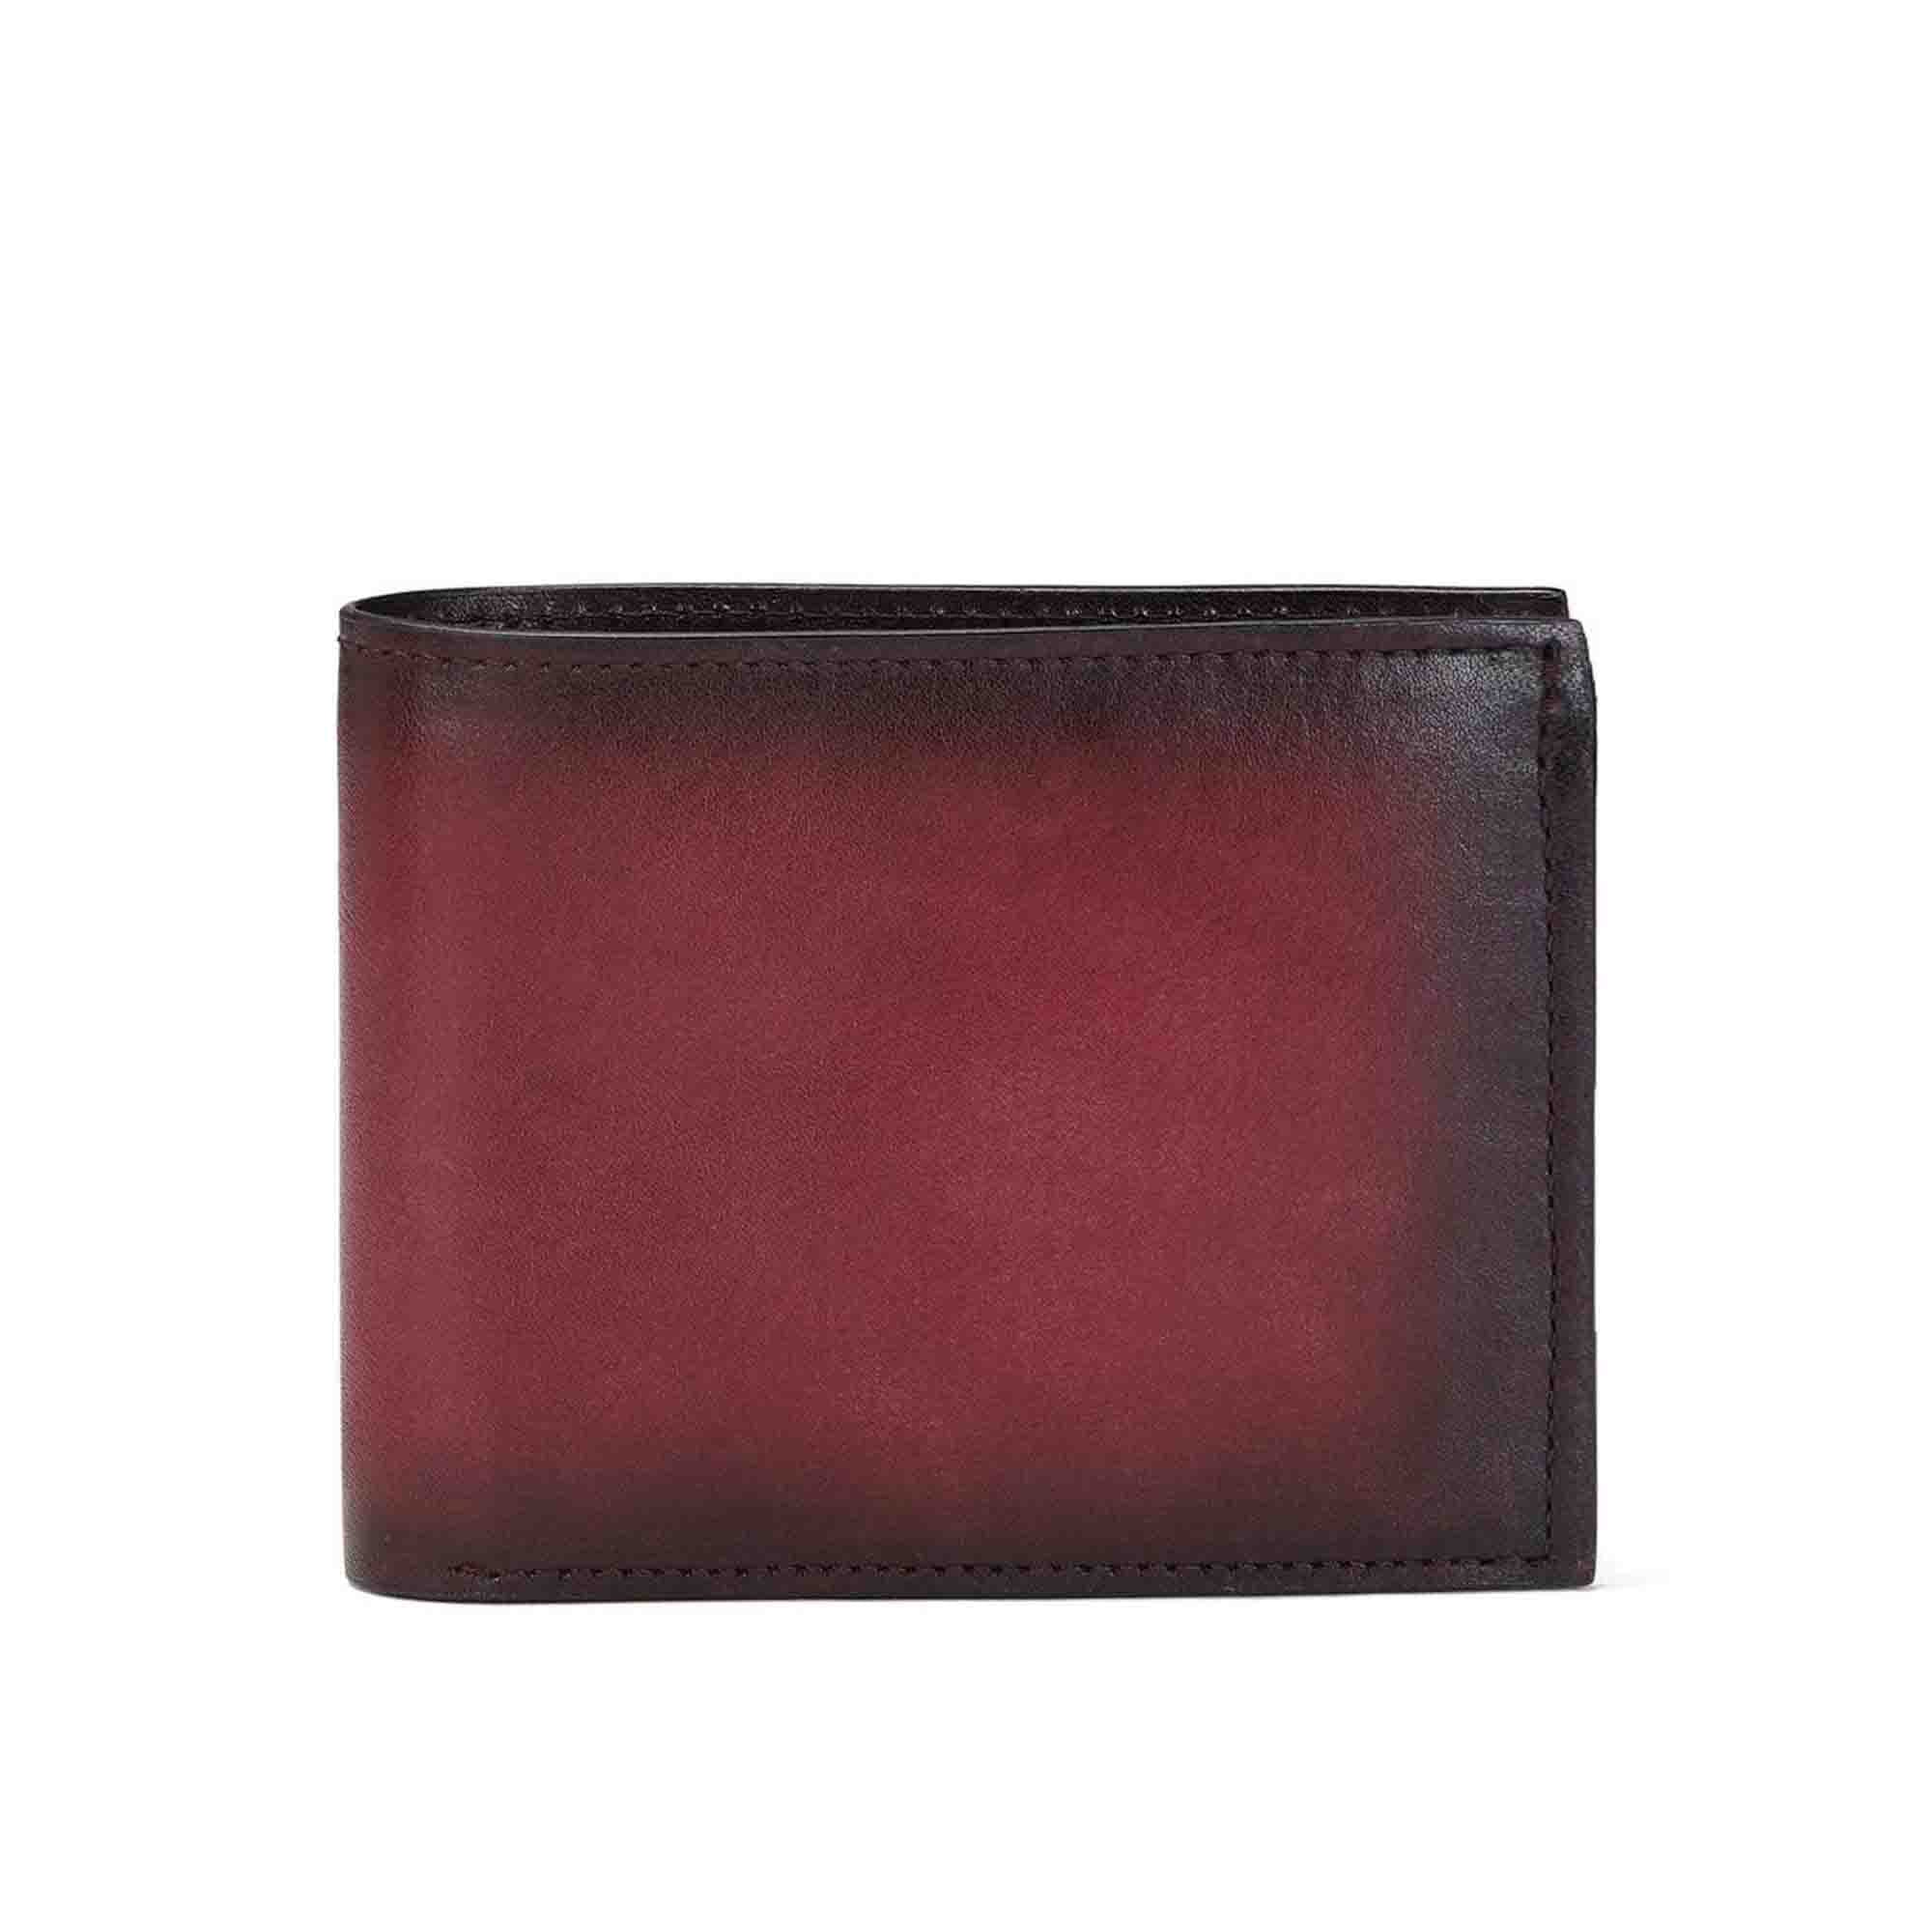 Buy REDHORNS Genuine Leather Wallet for Men | RFID Protected Mens Wallet  with 13 Credit/Debit Card Slots | Slim Leather Purse for Men (727H2_Dark  Brown) at Amazon.in